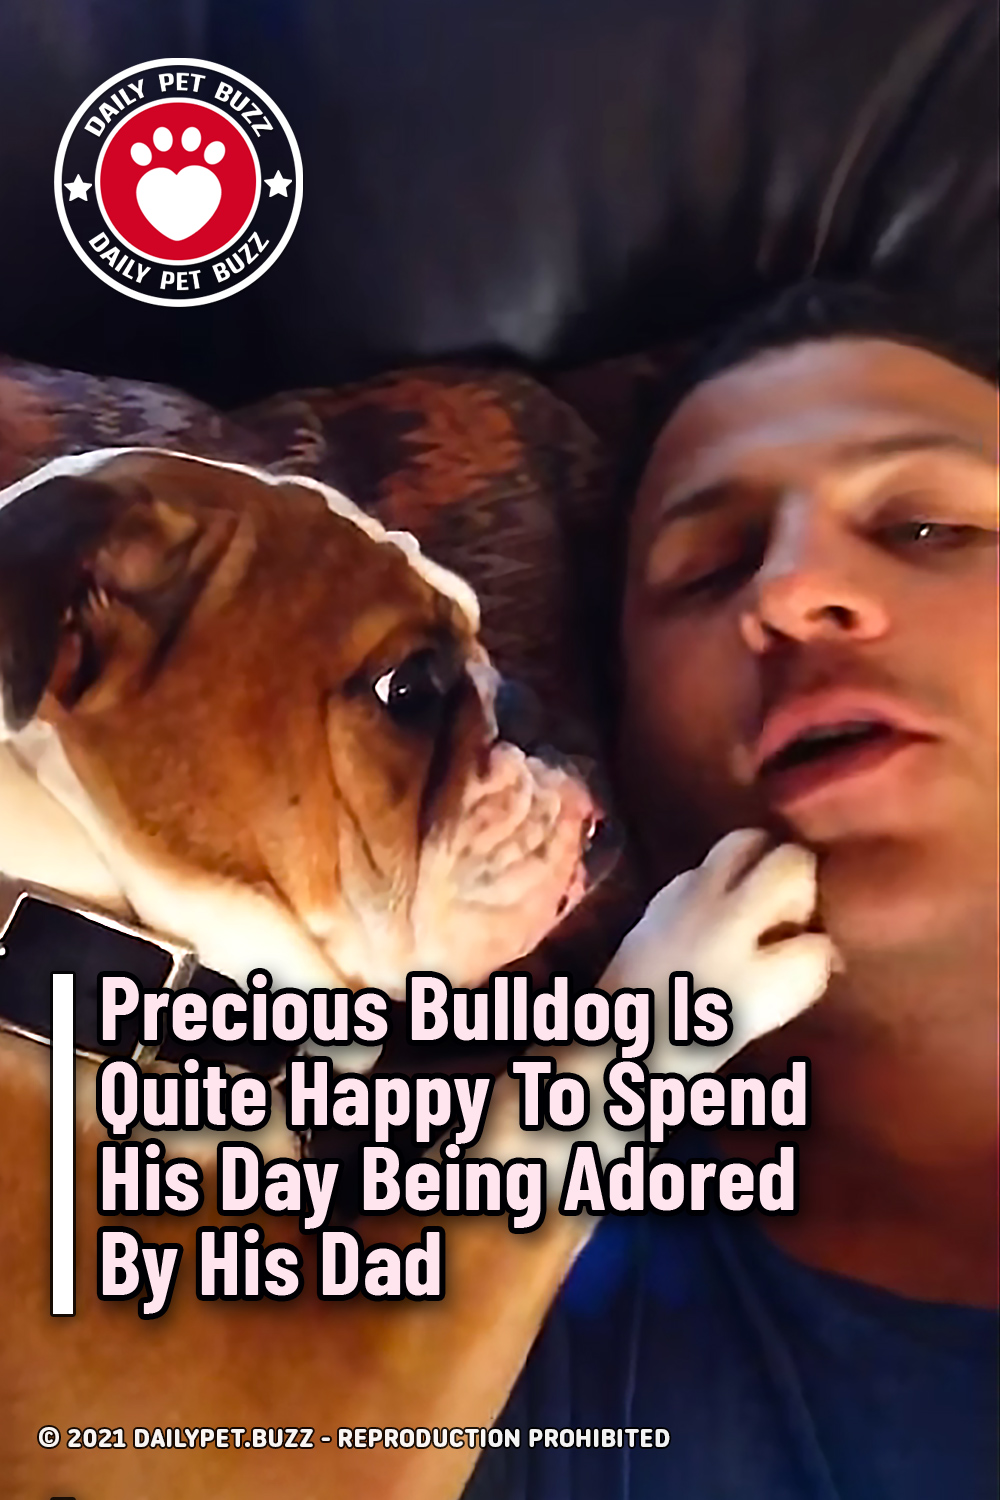 Precious Bulldog Is Quite Happy To Spend His Day Being Adored By His Dad